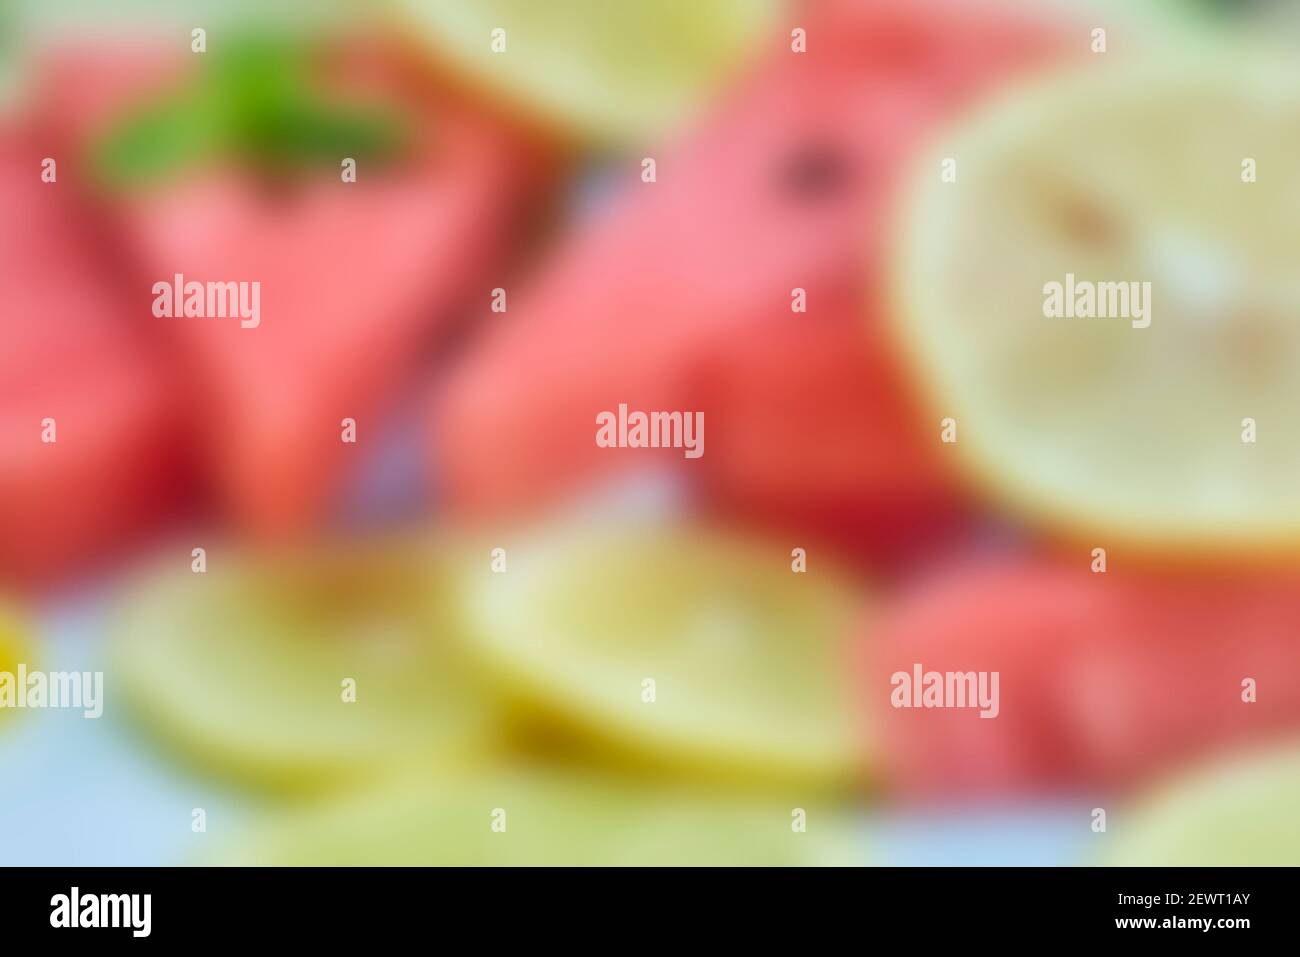 Blurred shot of fresh summer fruits background. Sweet watermelon and lemon slices. Watermelon fruit. Summer fruits background with gaussian blur Stock Photo